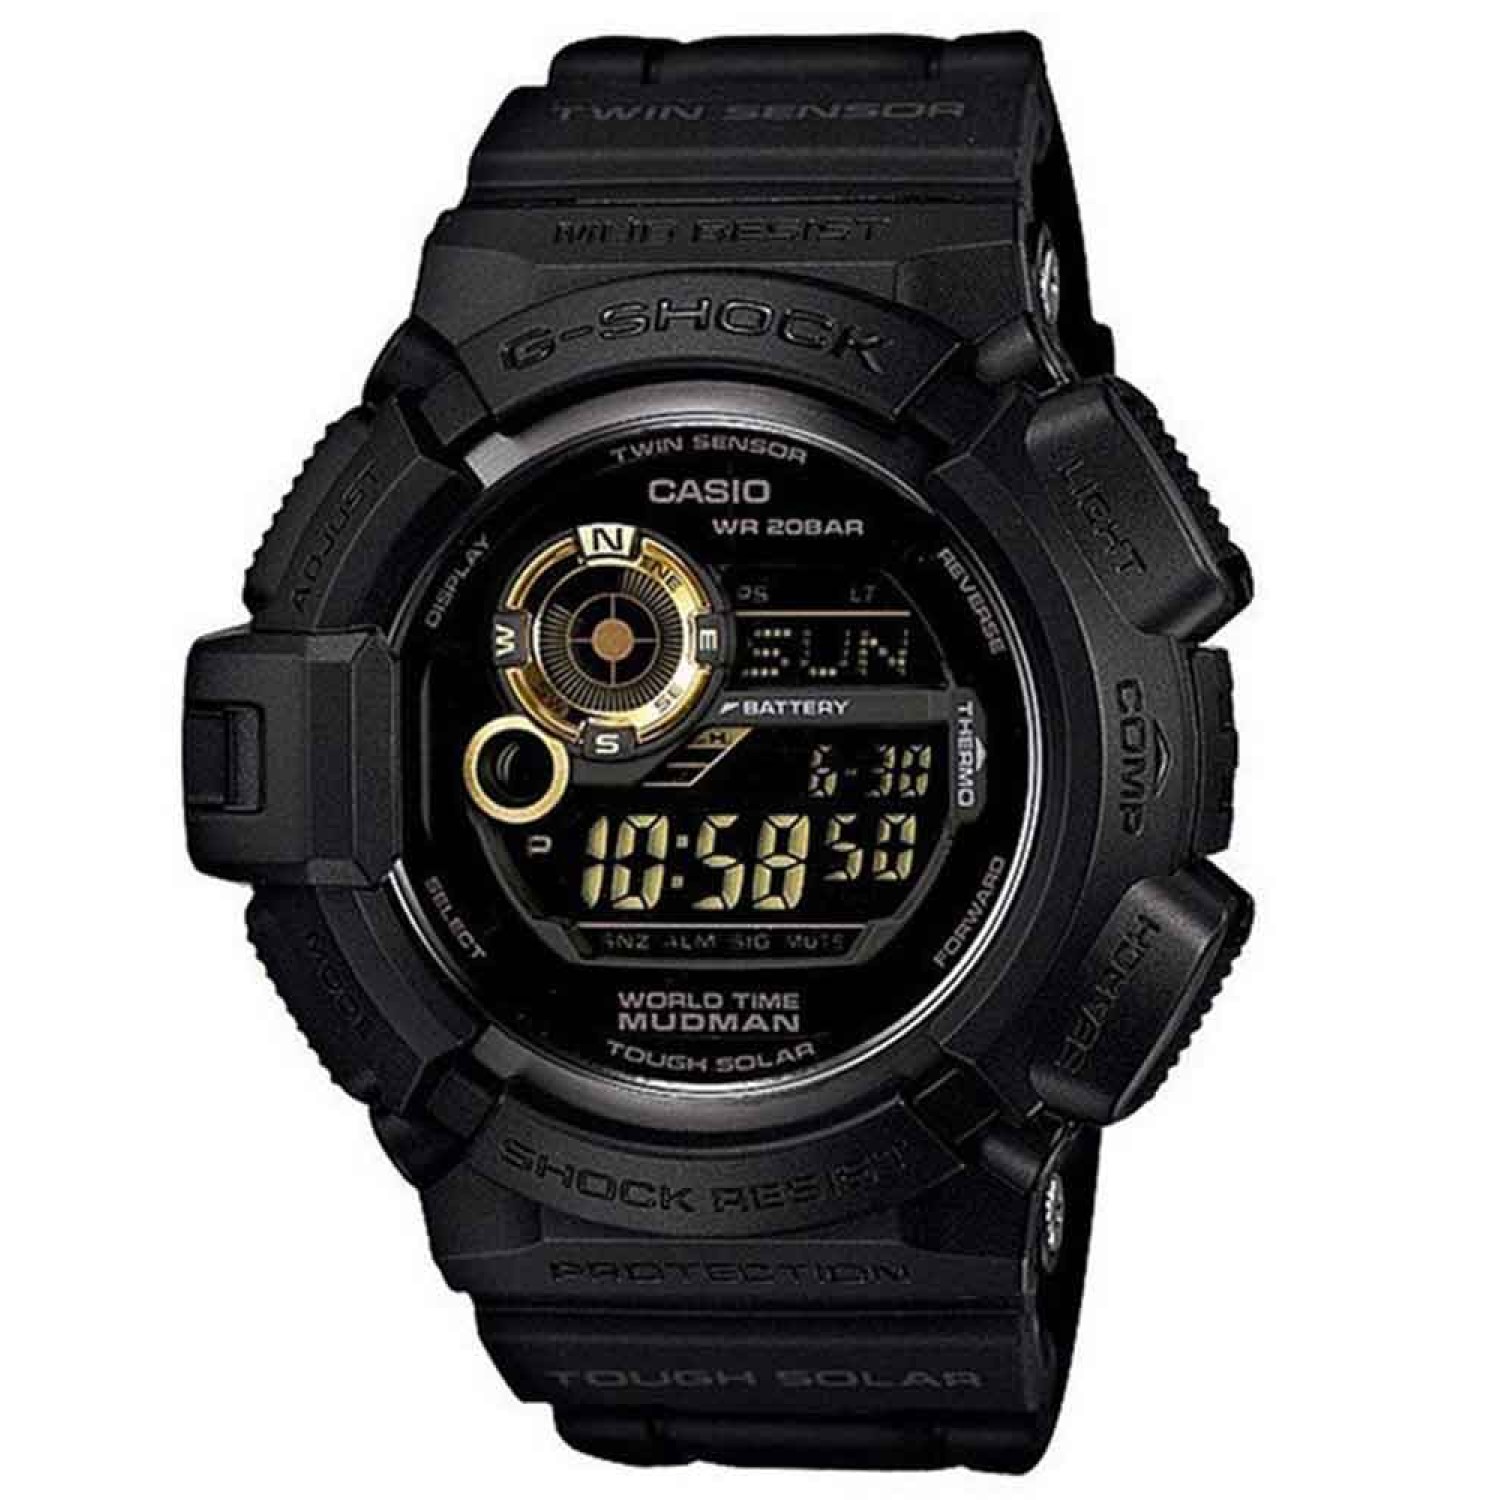 G9300GB-1D G-Shock Mudman Solar Watch. The G9300GB-1D from the MUDMAN is in glossy black. The basic black motif is accented by gold gears and dials that give these watches a mechanical look. Since the release of the original G-SHOCK watch in 198 @christie